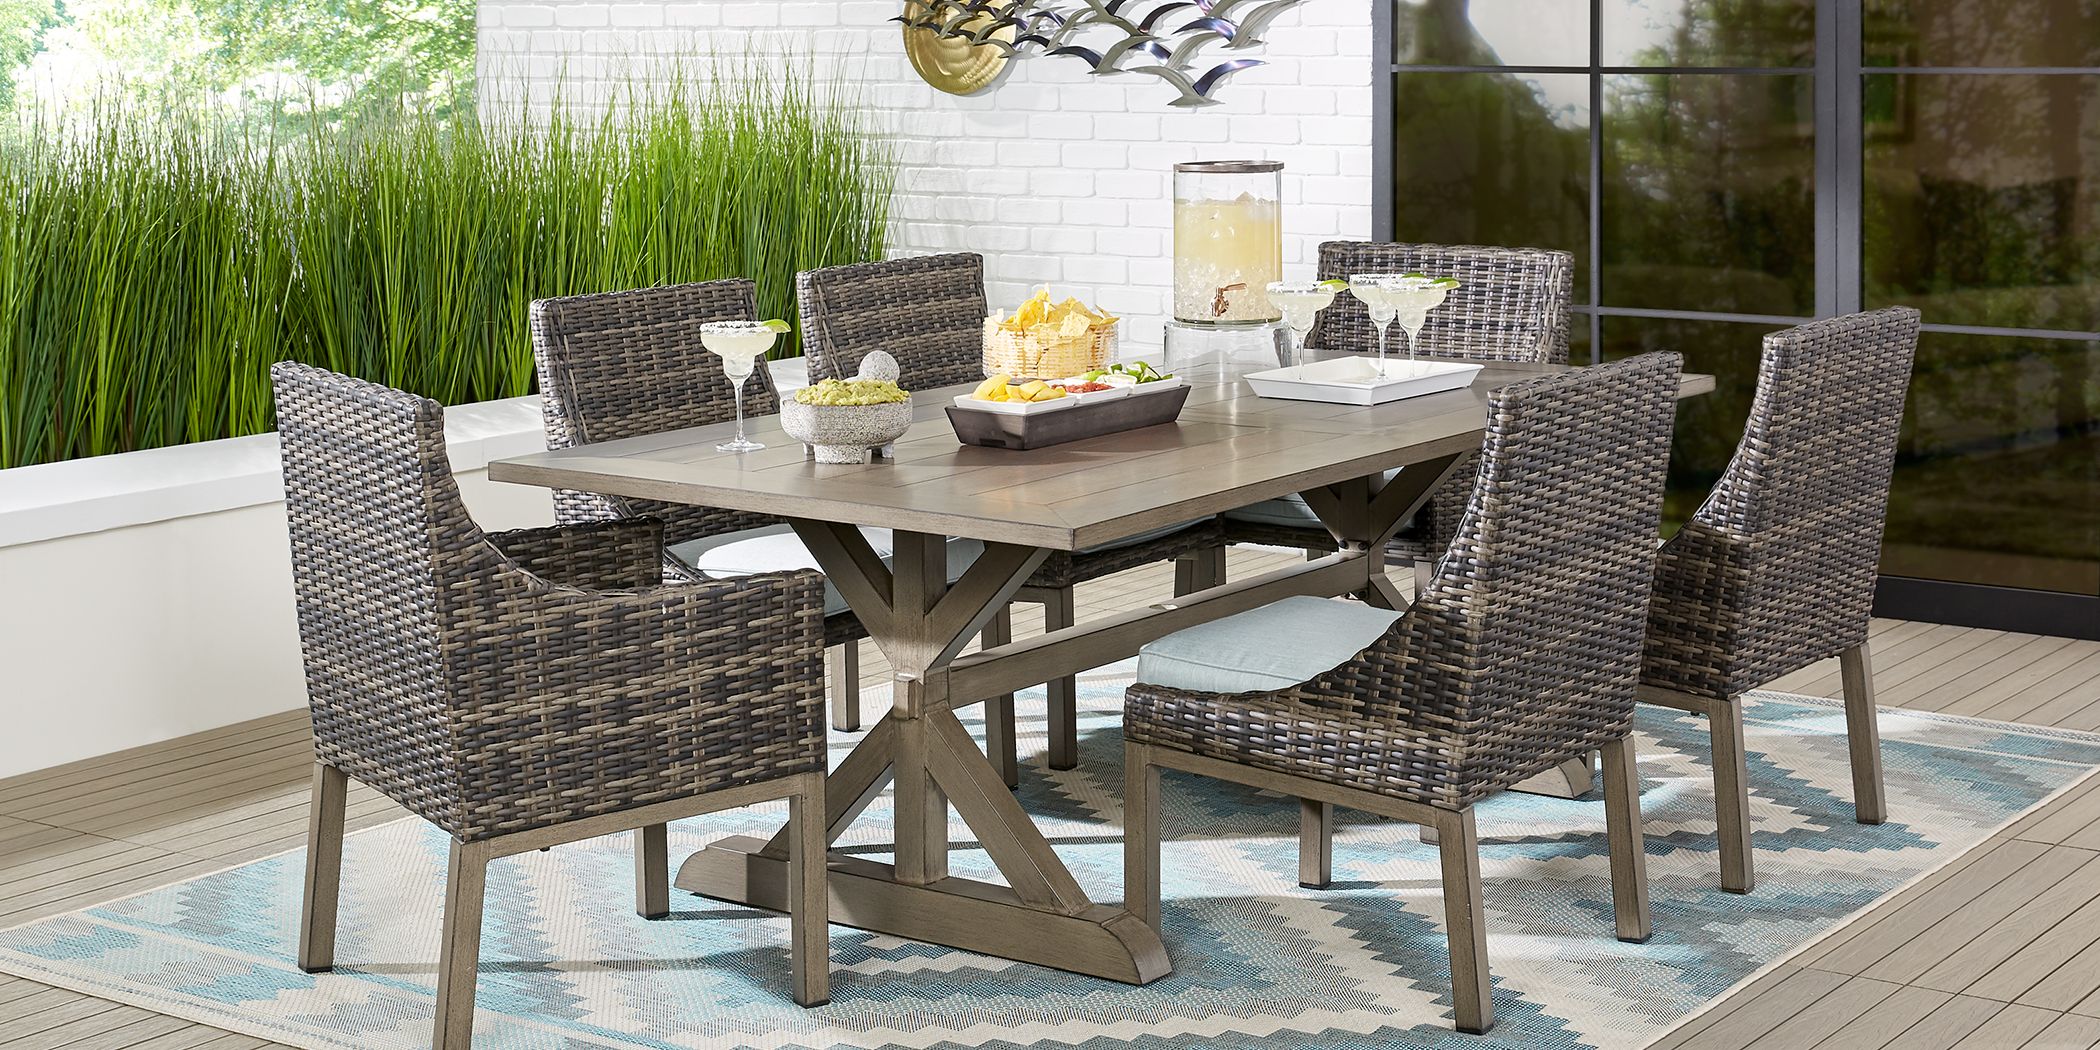 Outdoor 9 Piece Patio Dining Sets, Wooden Outdoor Dining Set With Cushions